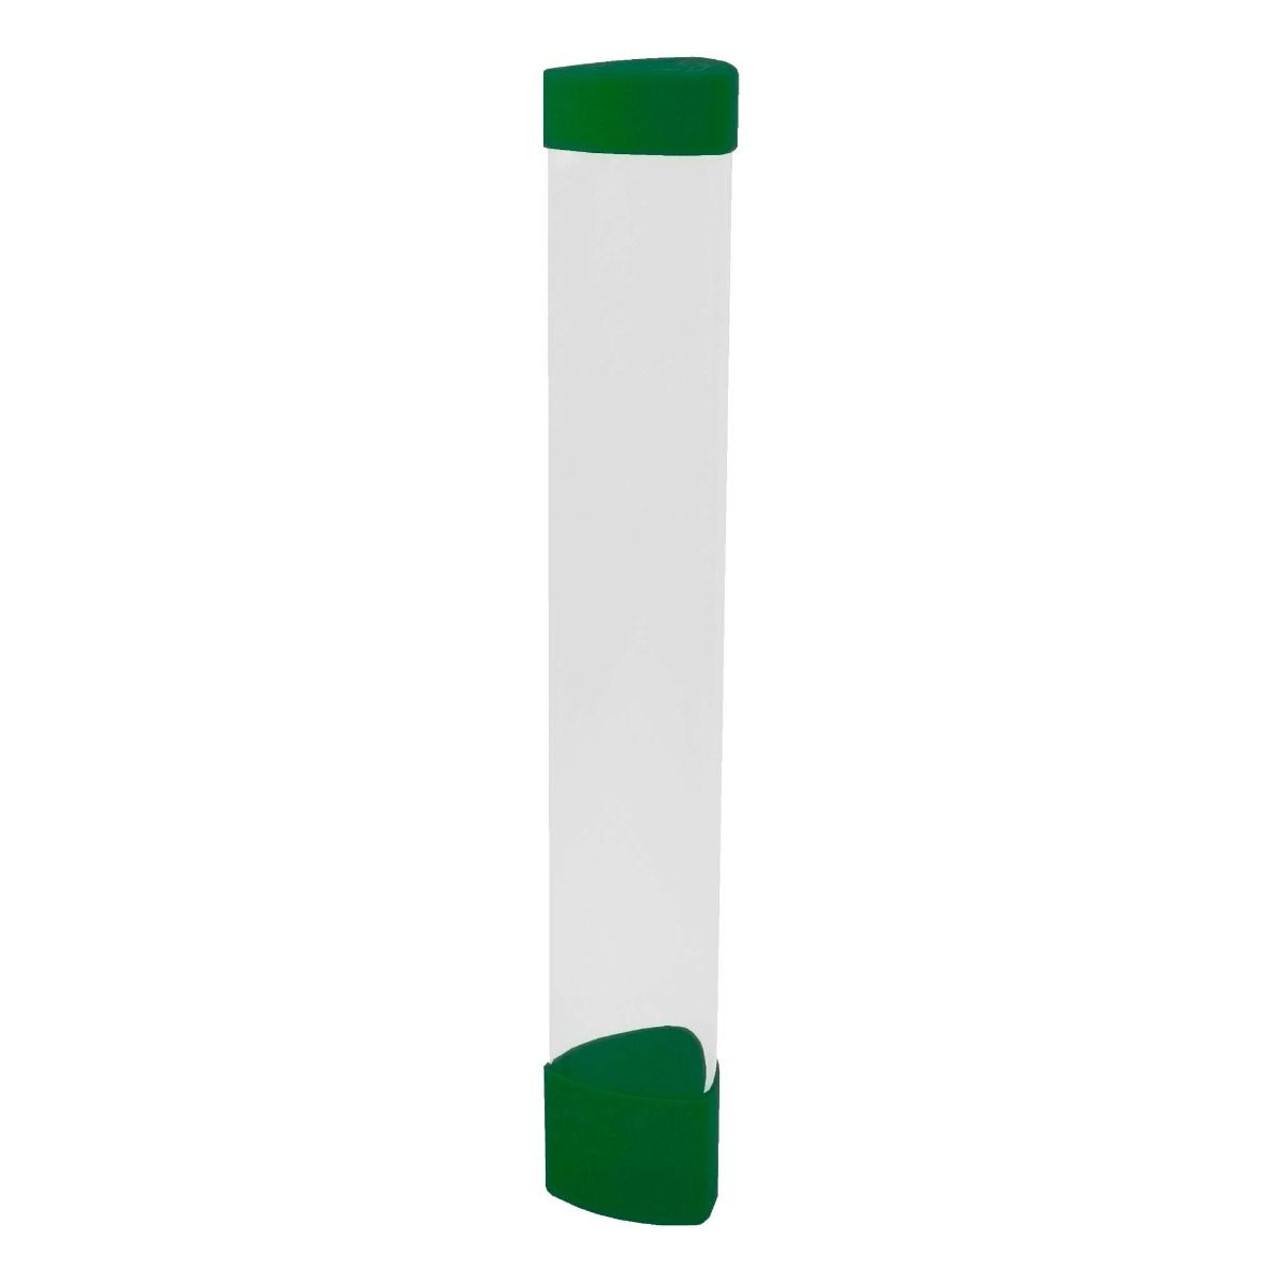 BCW Playmat Tube - Green (with dice)